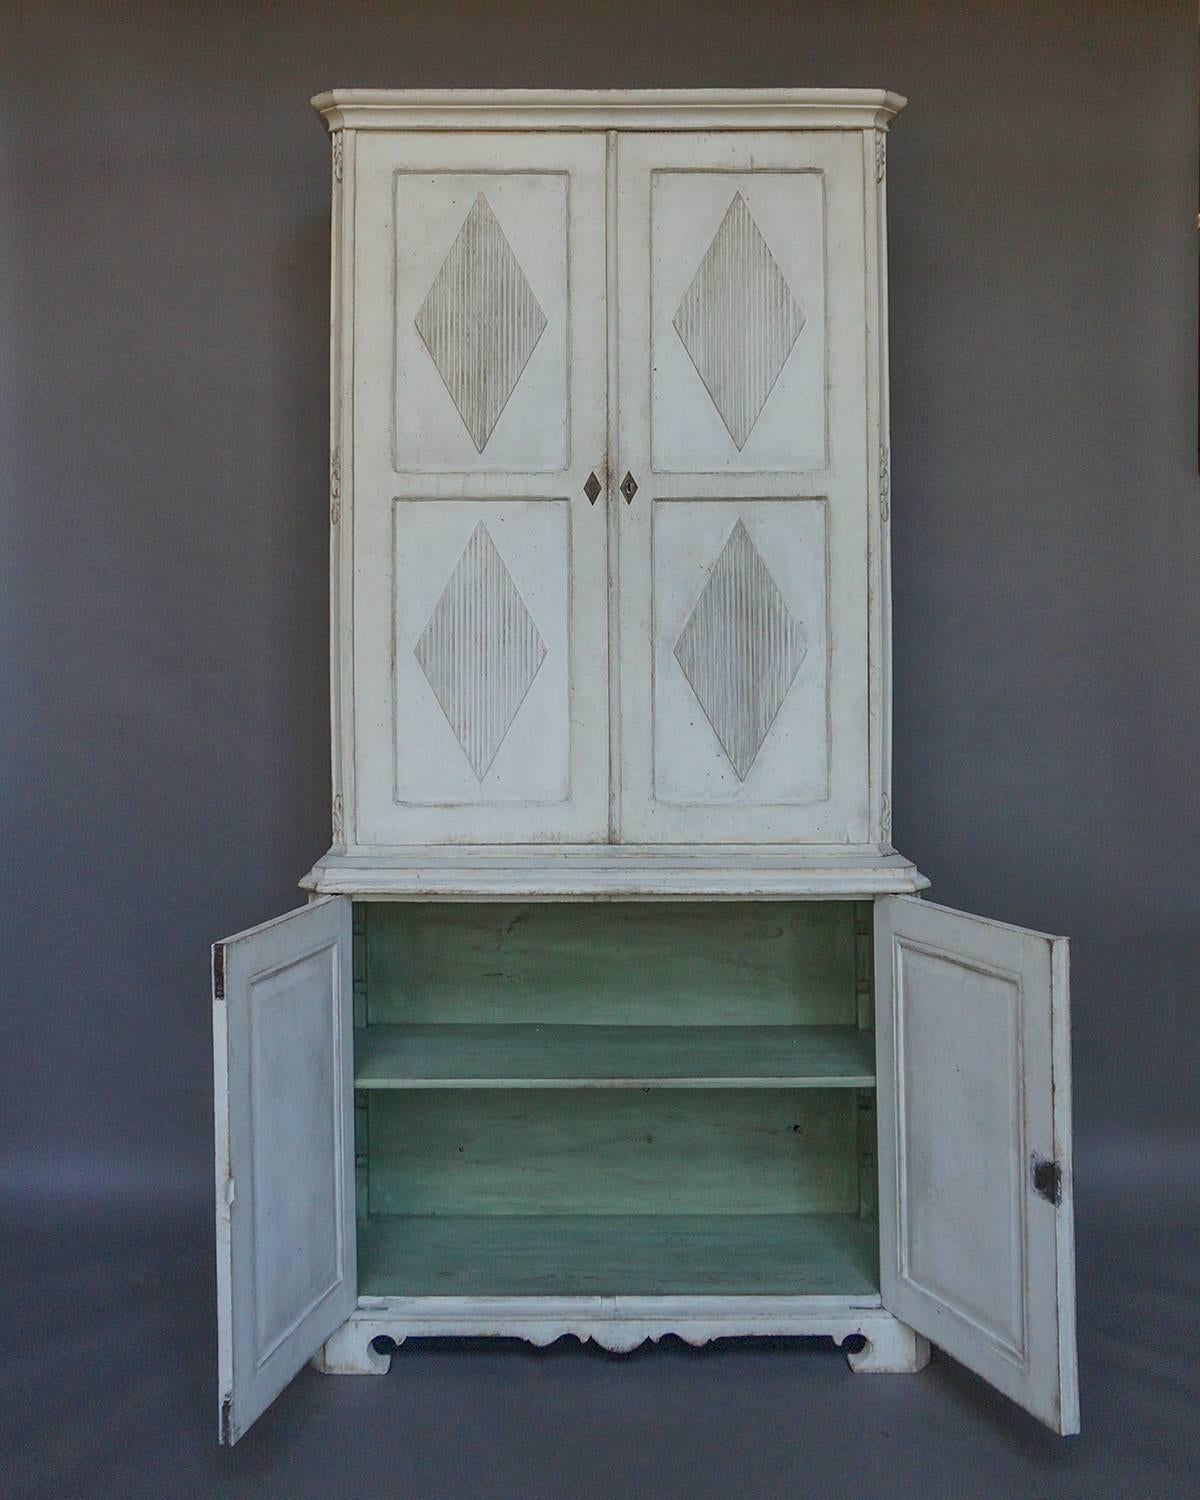 Cabinet in two parts, Sweden circa 1800.  The tall upper section has double doors, each with two reeded lozenges, which open onto two shelves, three small drawers, and 28 compartments.  The deeper lower section has two shelves behind double doors,